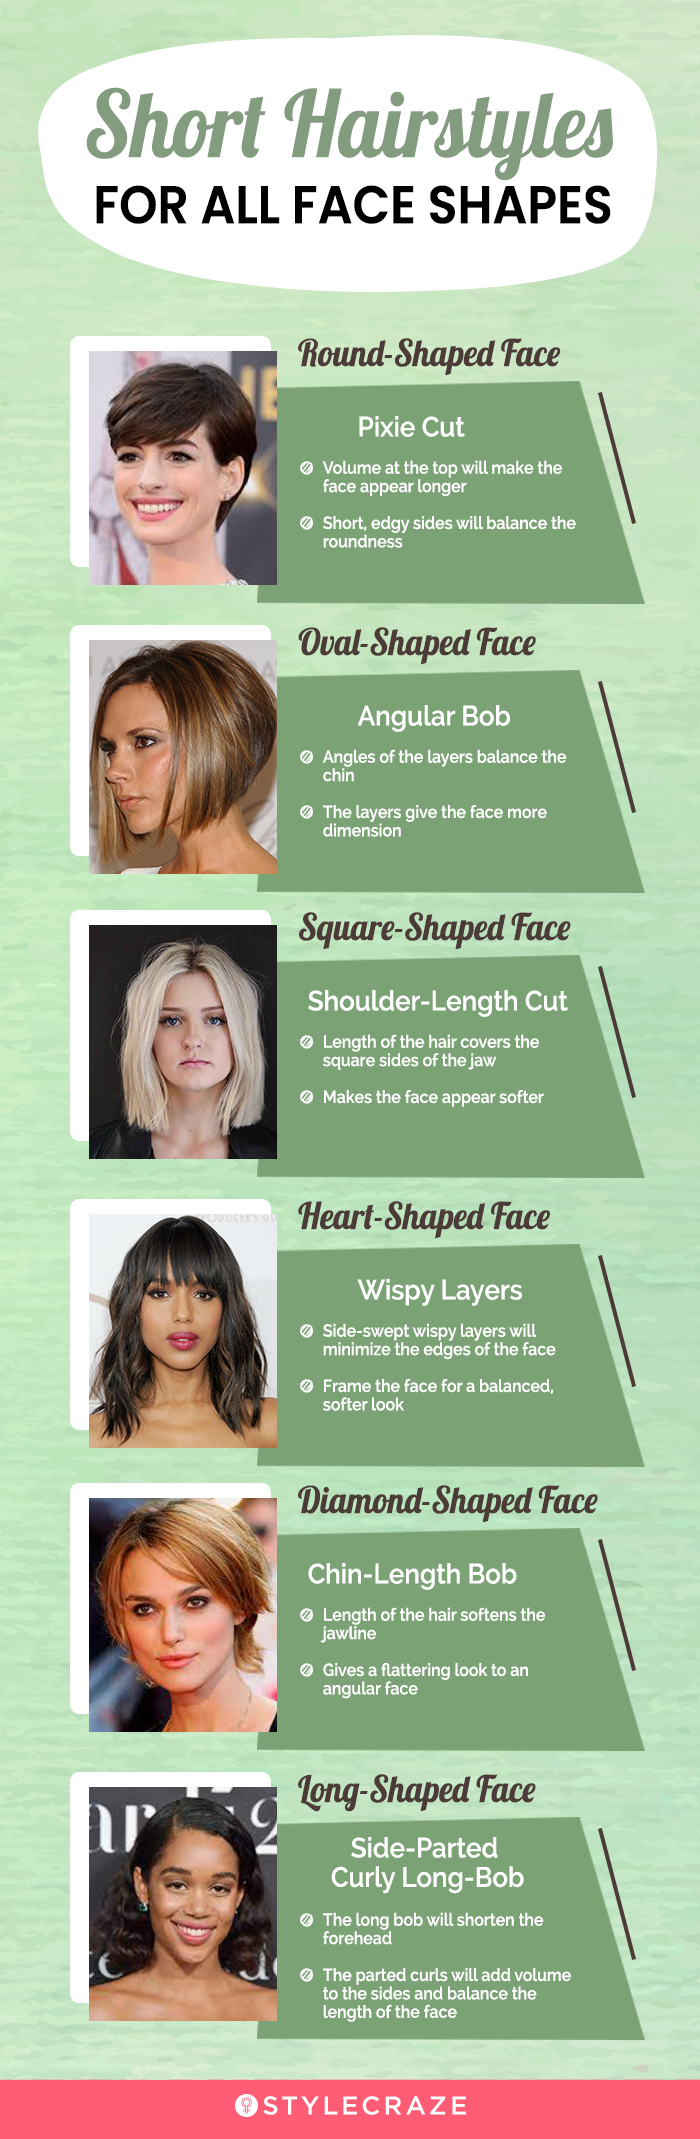 The Most Flattering Haircuts for Your Face Shape - The Trend Spotter